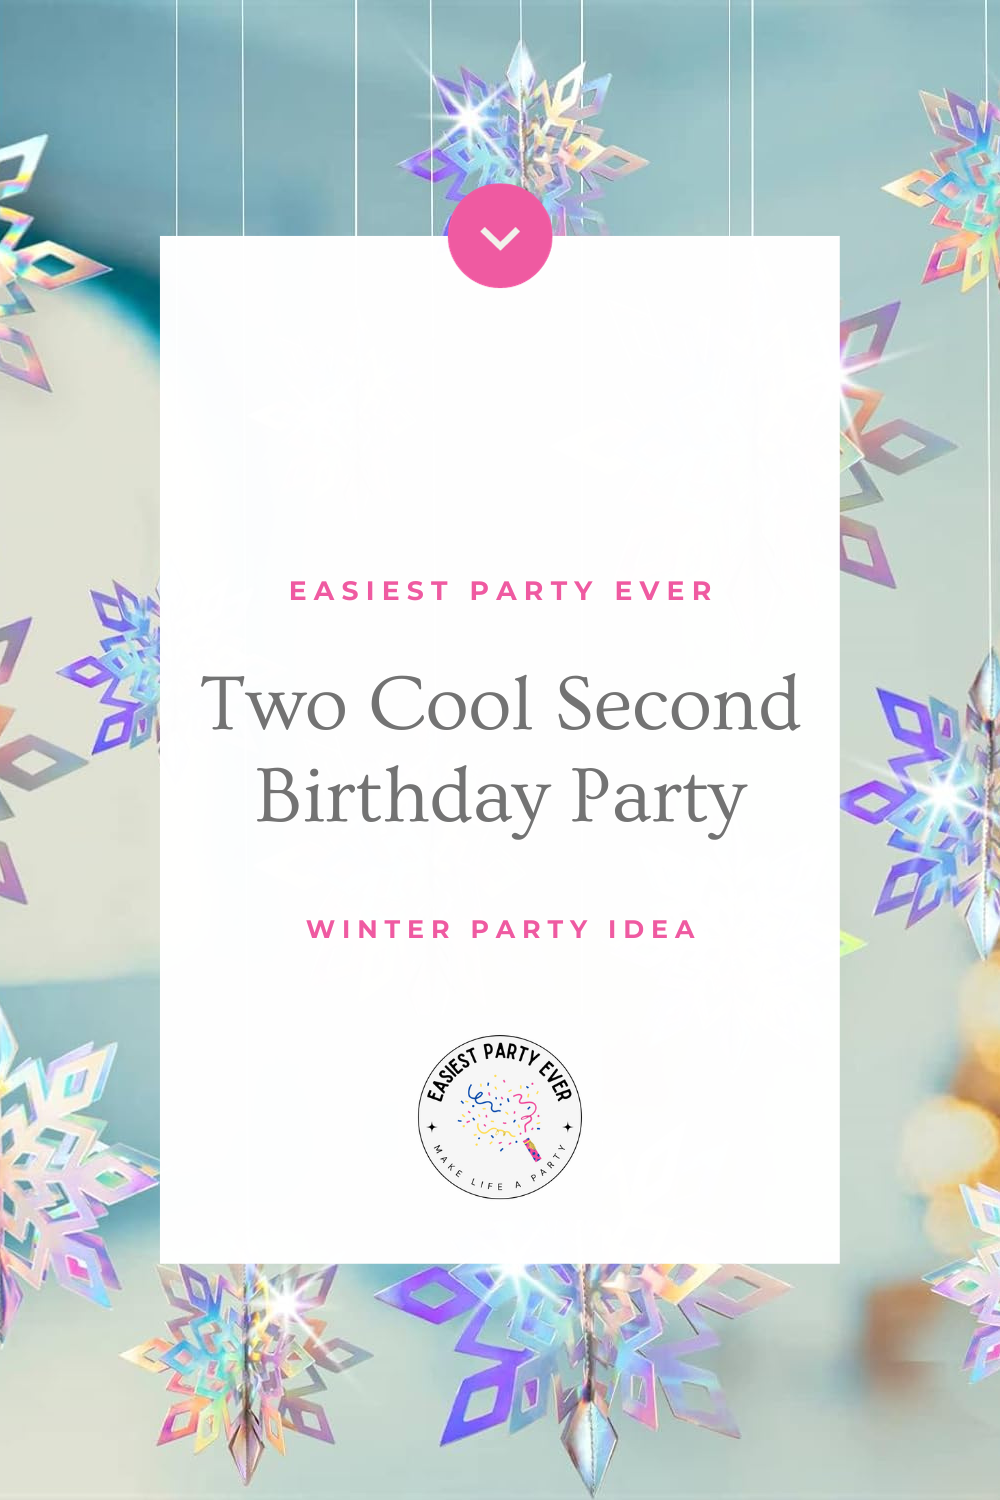 The Best “Two Cool” Winter Second Birthday Party Ideas